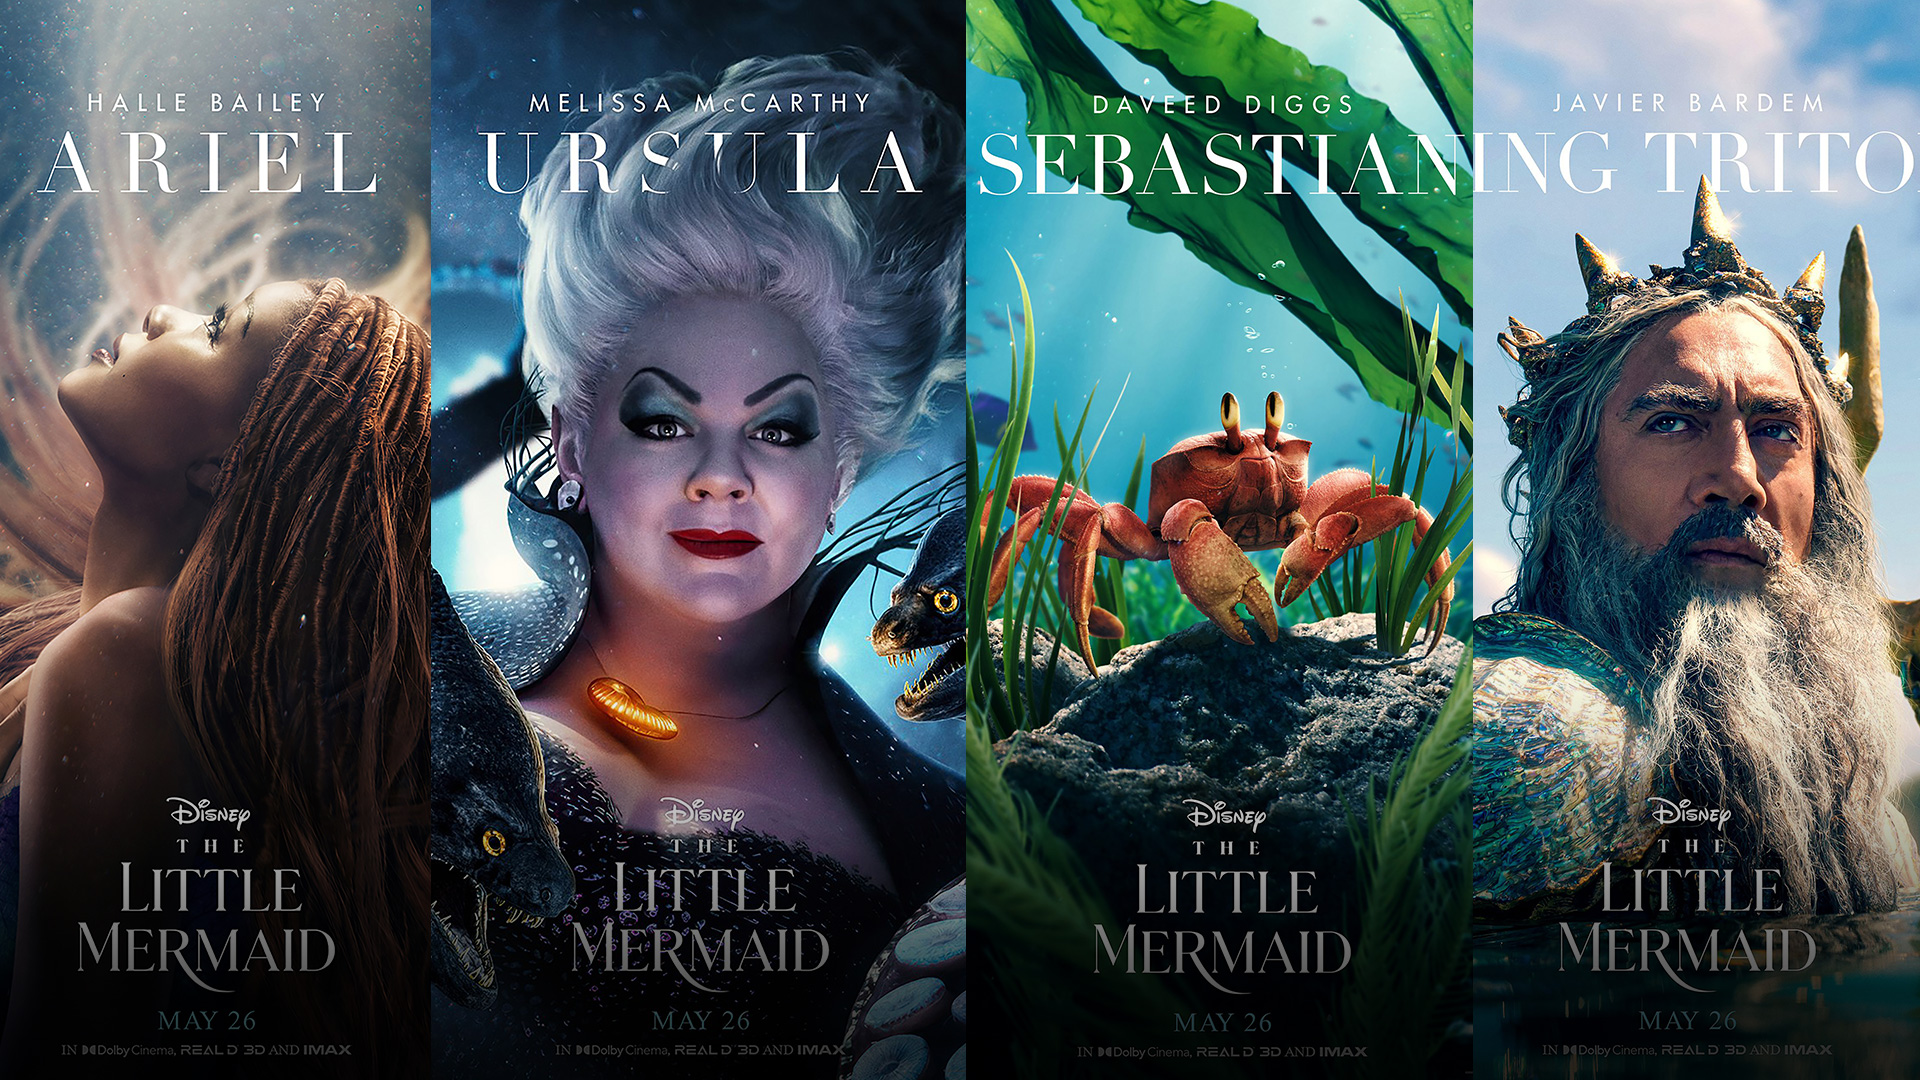 Stunning new characters posters for THE LITTLE MERMAID are out of this world!